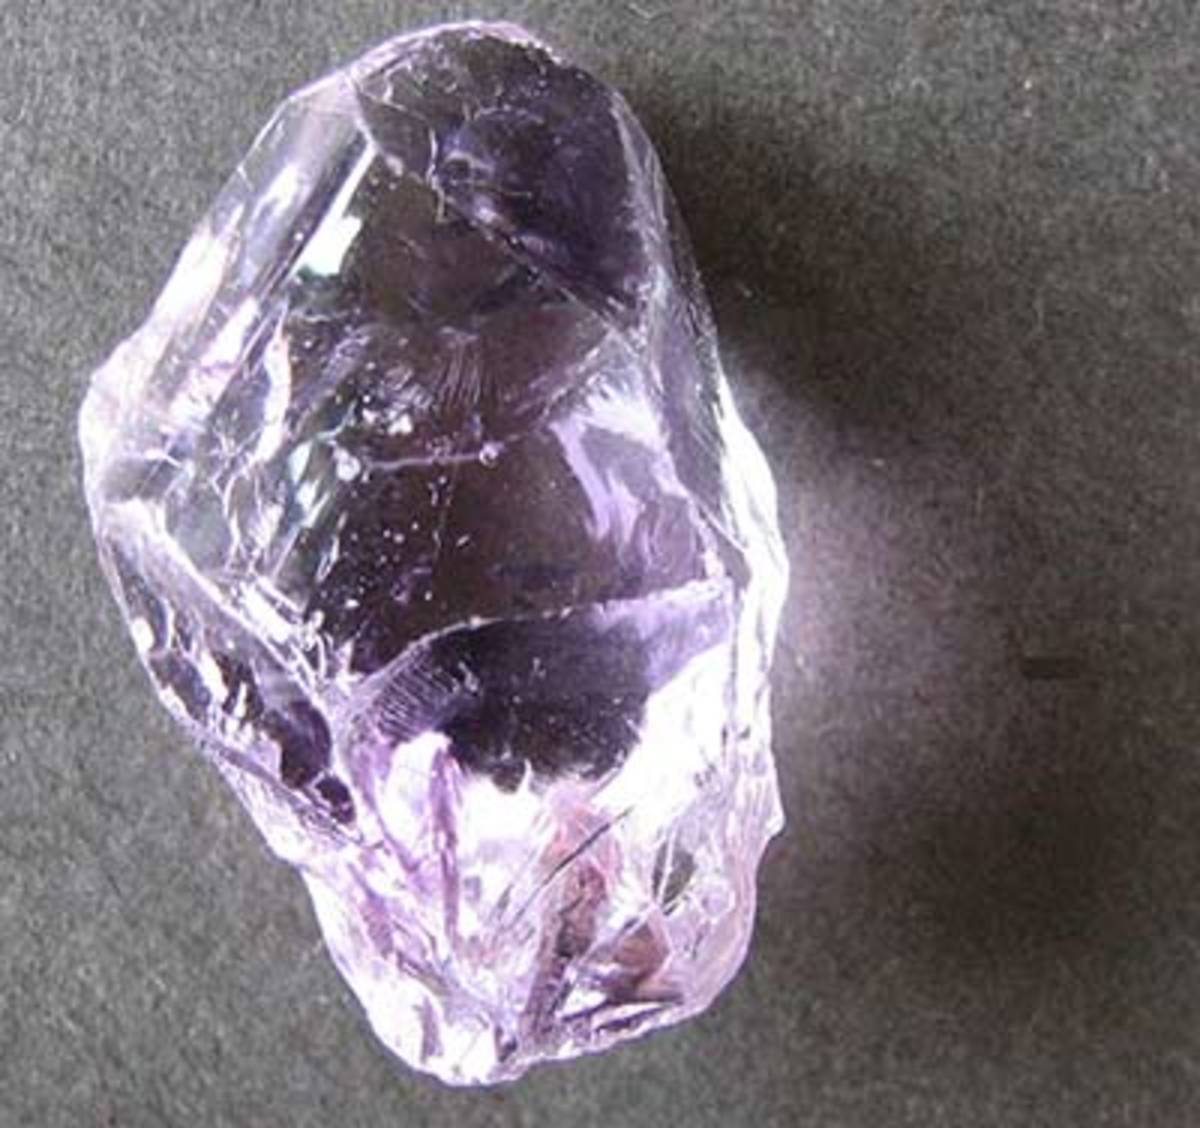 The Meaning of Pink Amethyst